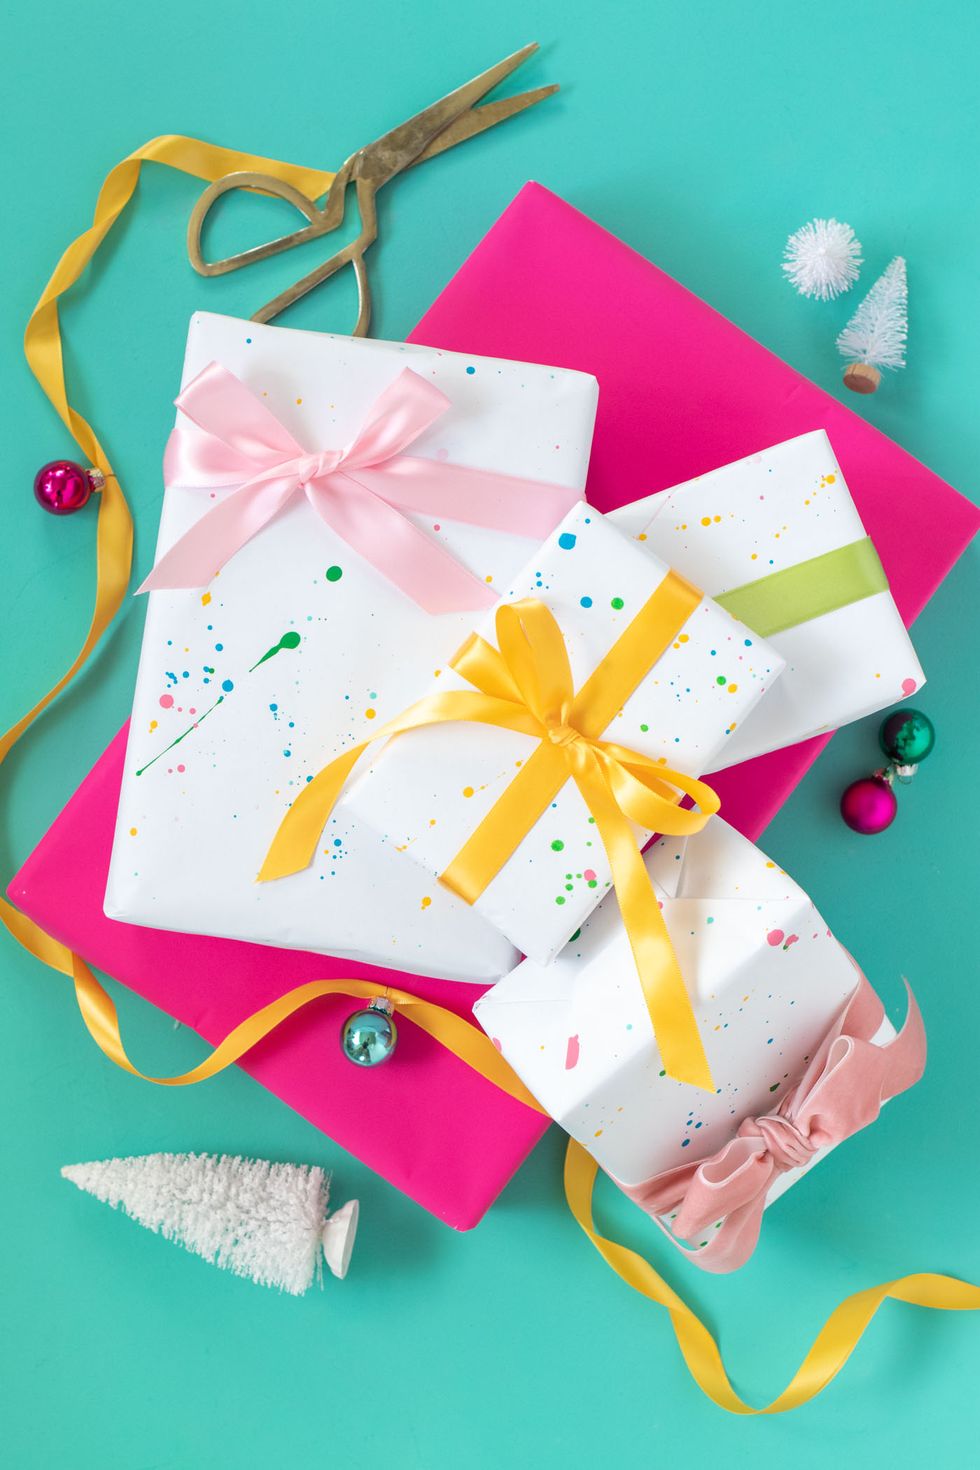 Gift Tag Ideas for Making Your Presents Pop